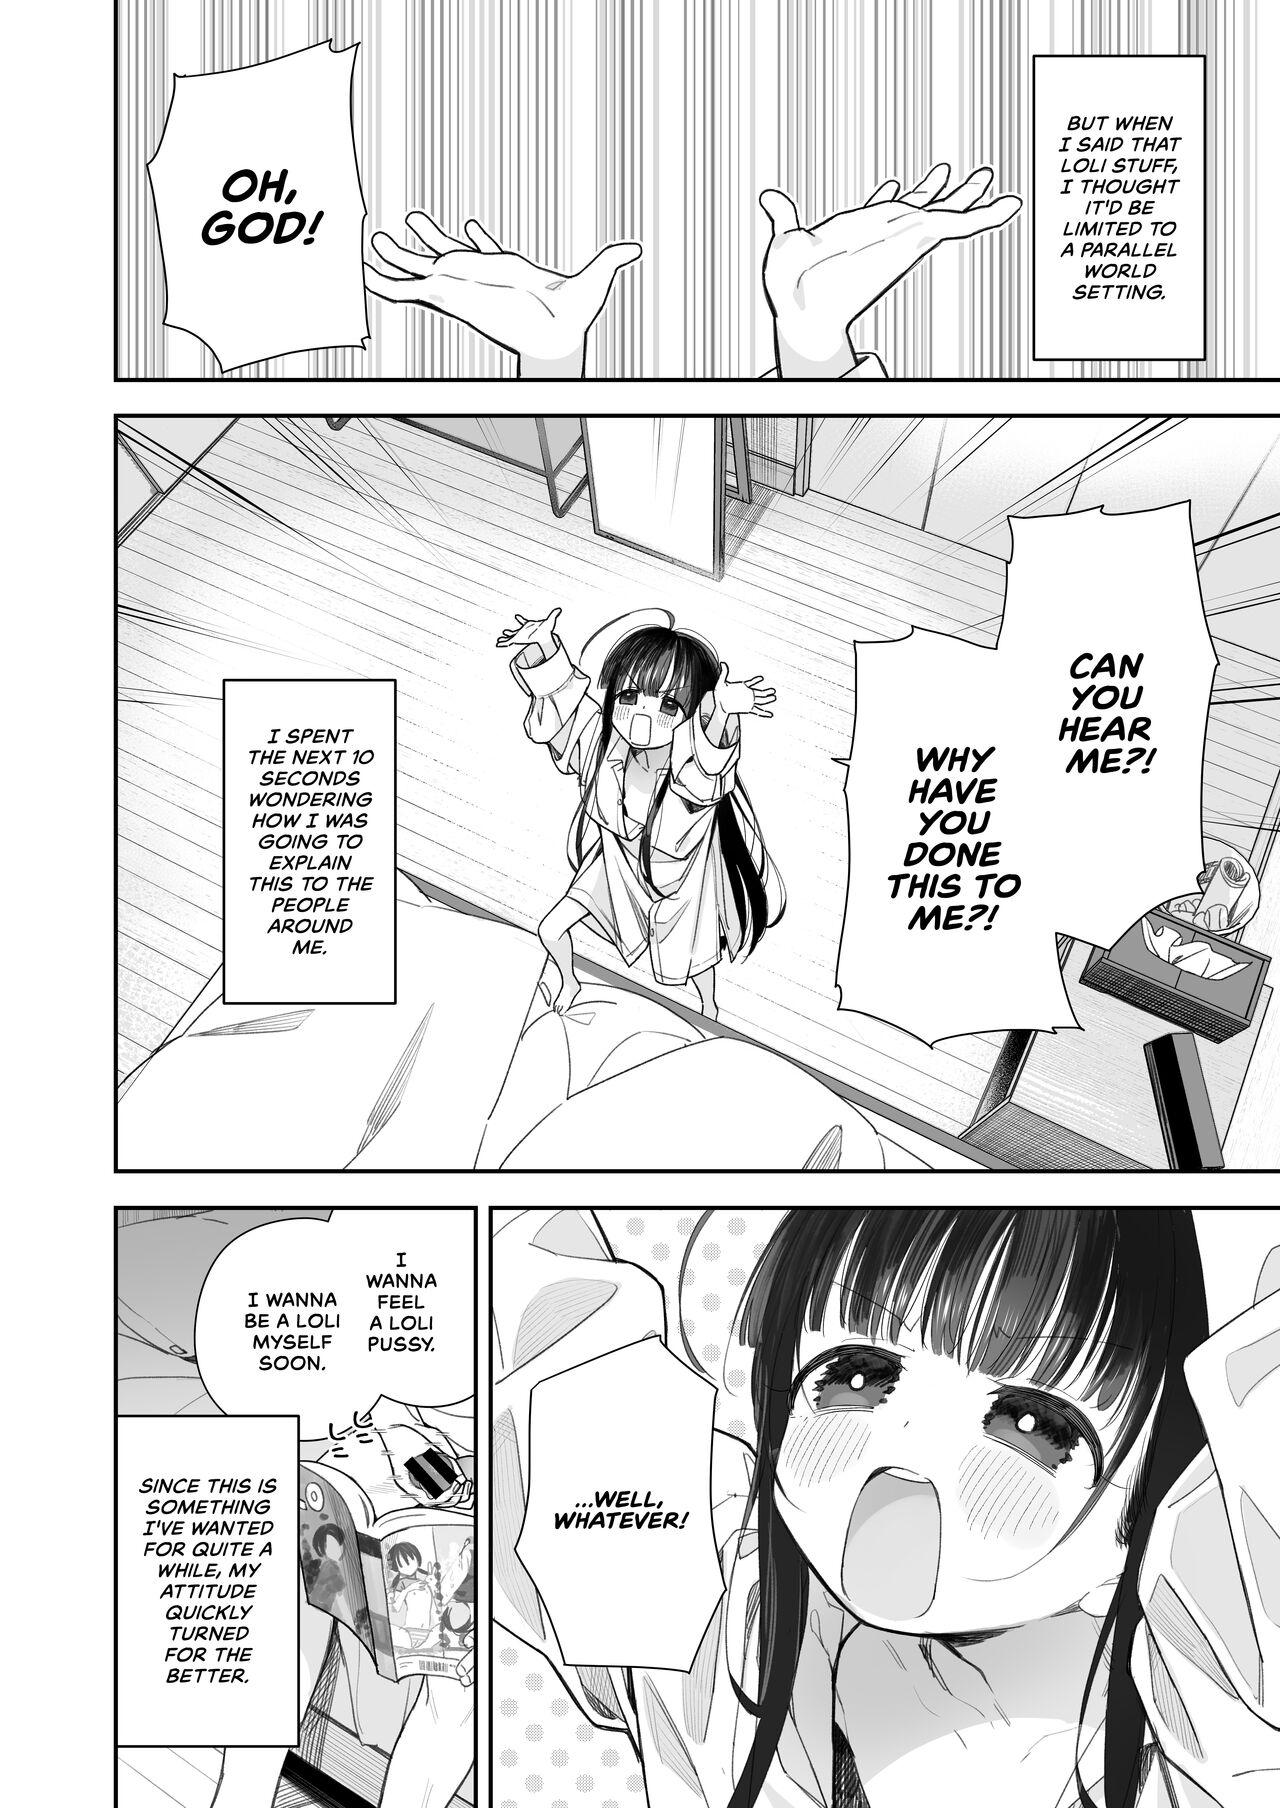 Big Boobs [Asunaro Neat. (Ronna)] TS Loli Oji-san no Bouken Onanie Hen | The Adventures of an Old Man Who Was Gender-Swapped Into a Loli ~Masturbation Chapter~ [English] [CulturedCommissions] [Digital] - Original Girl Gets Fucked - Page 5